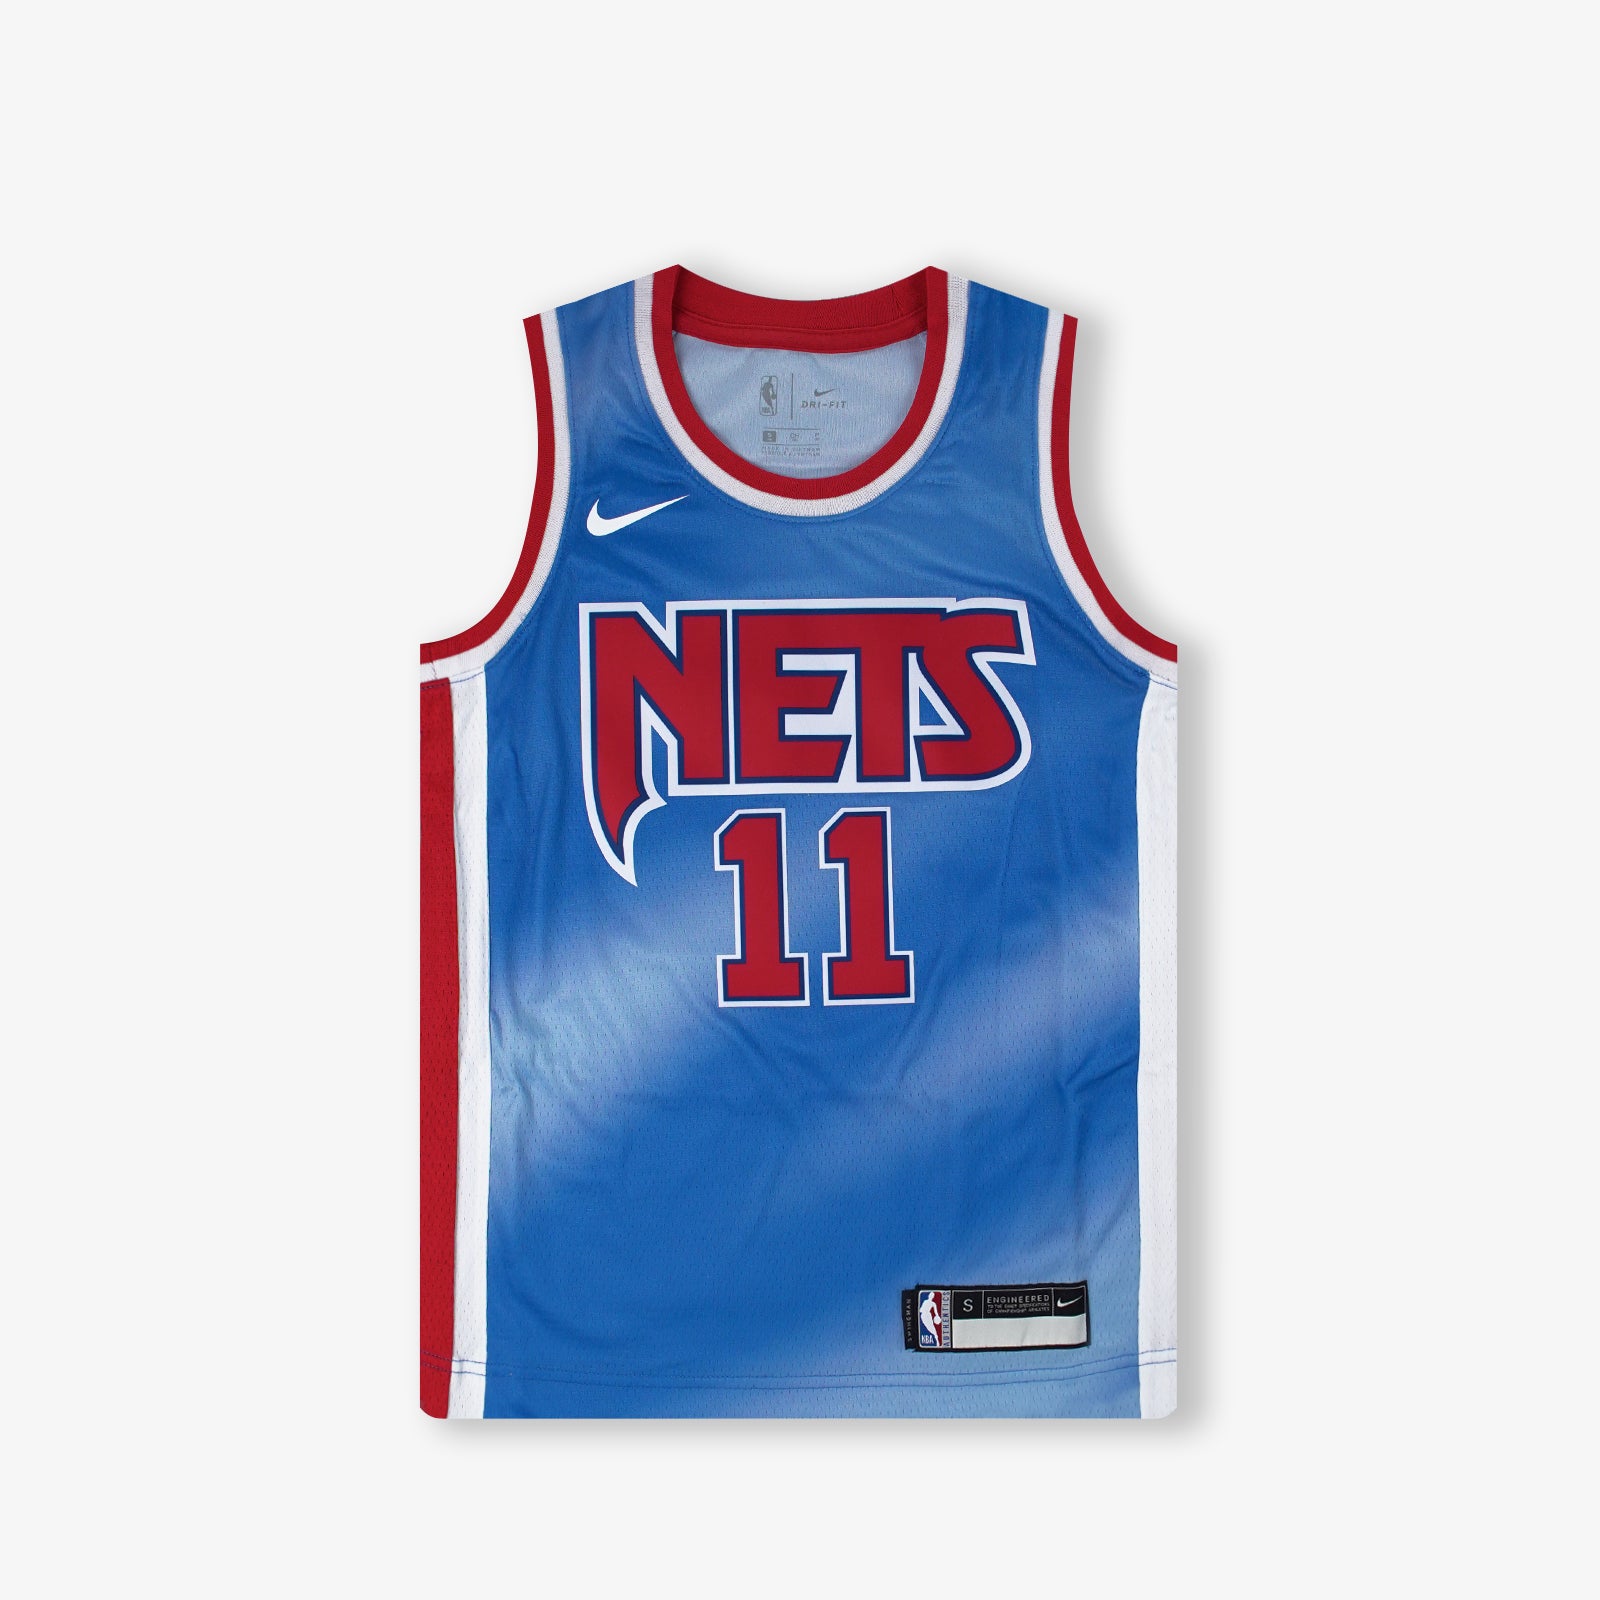 kyrie irving brooklyn nets jersey youth